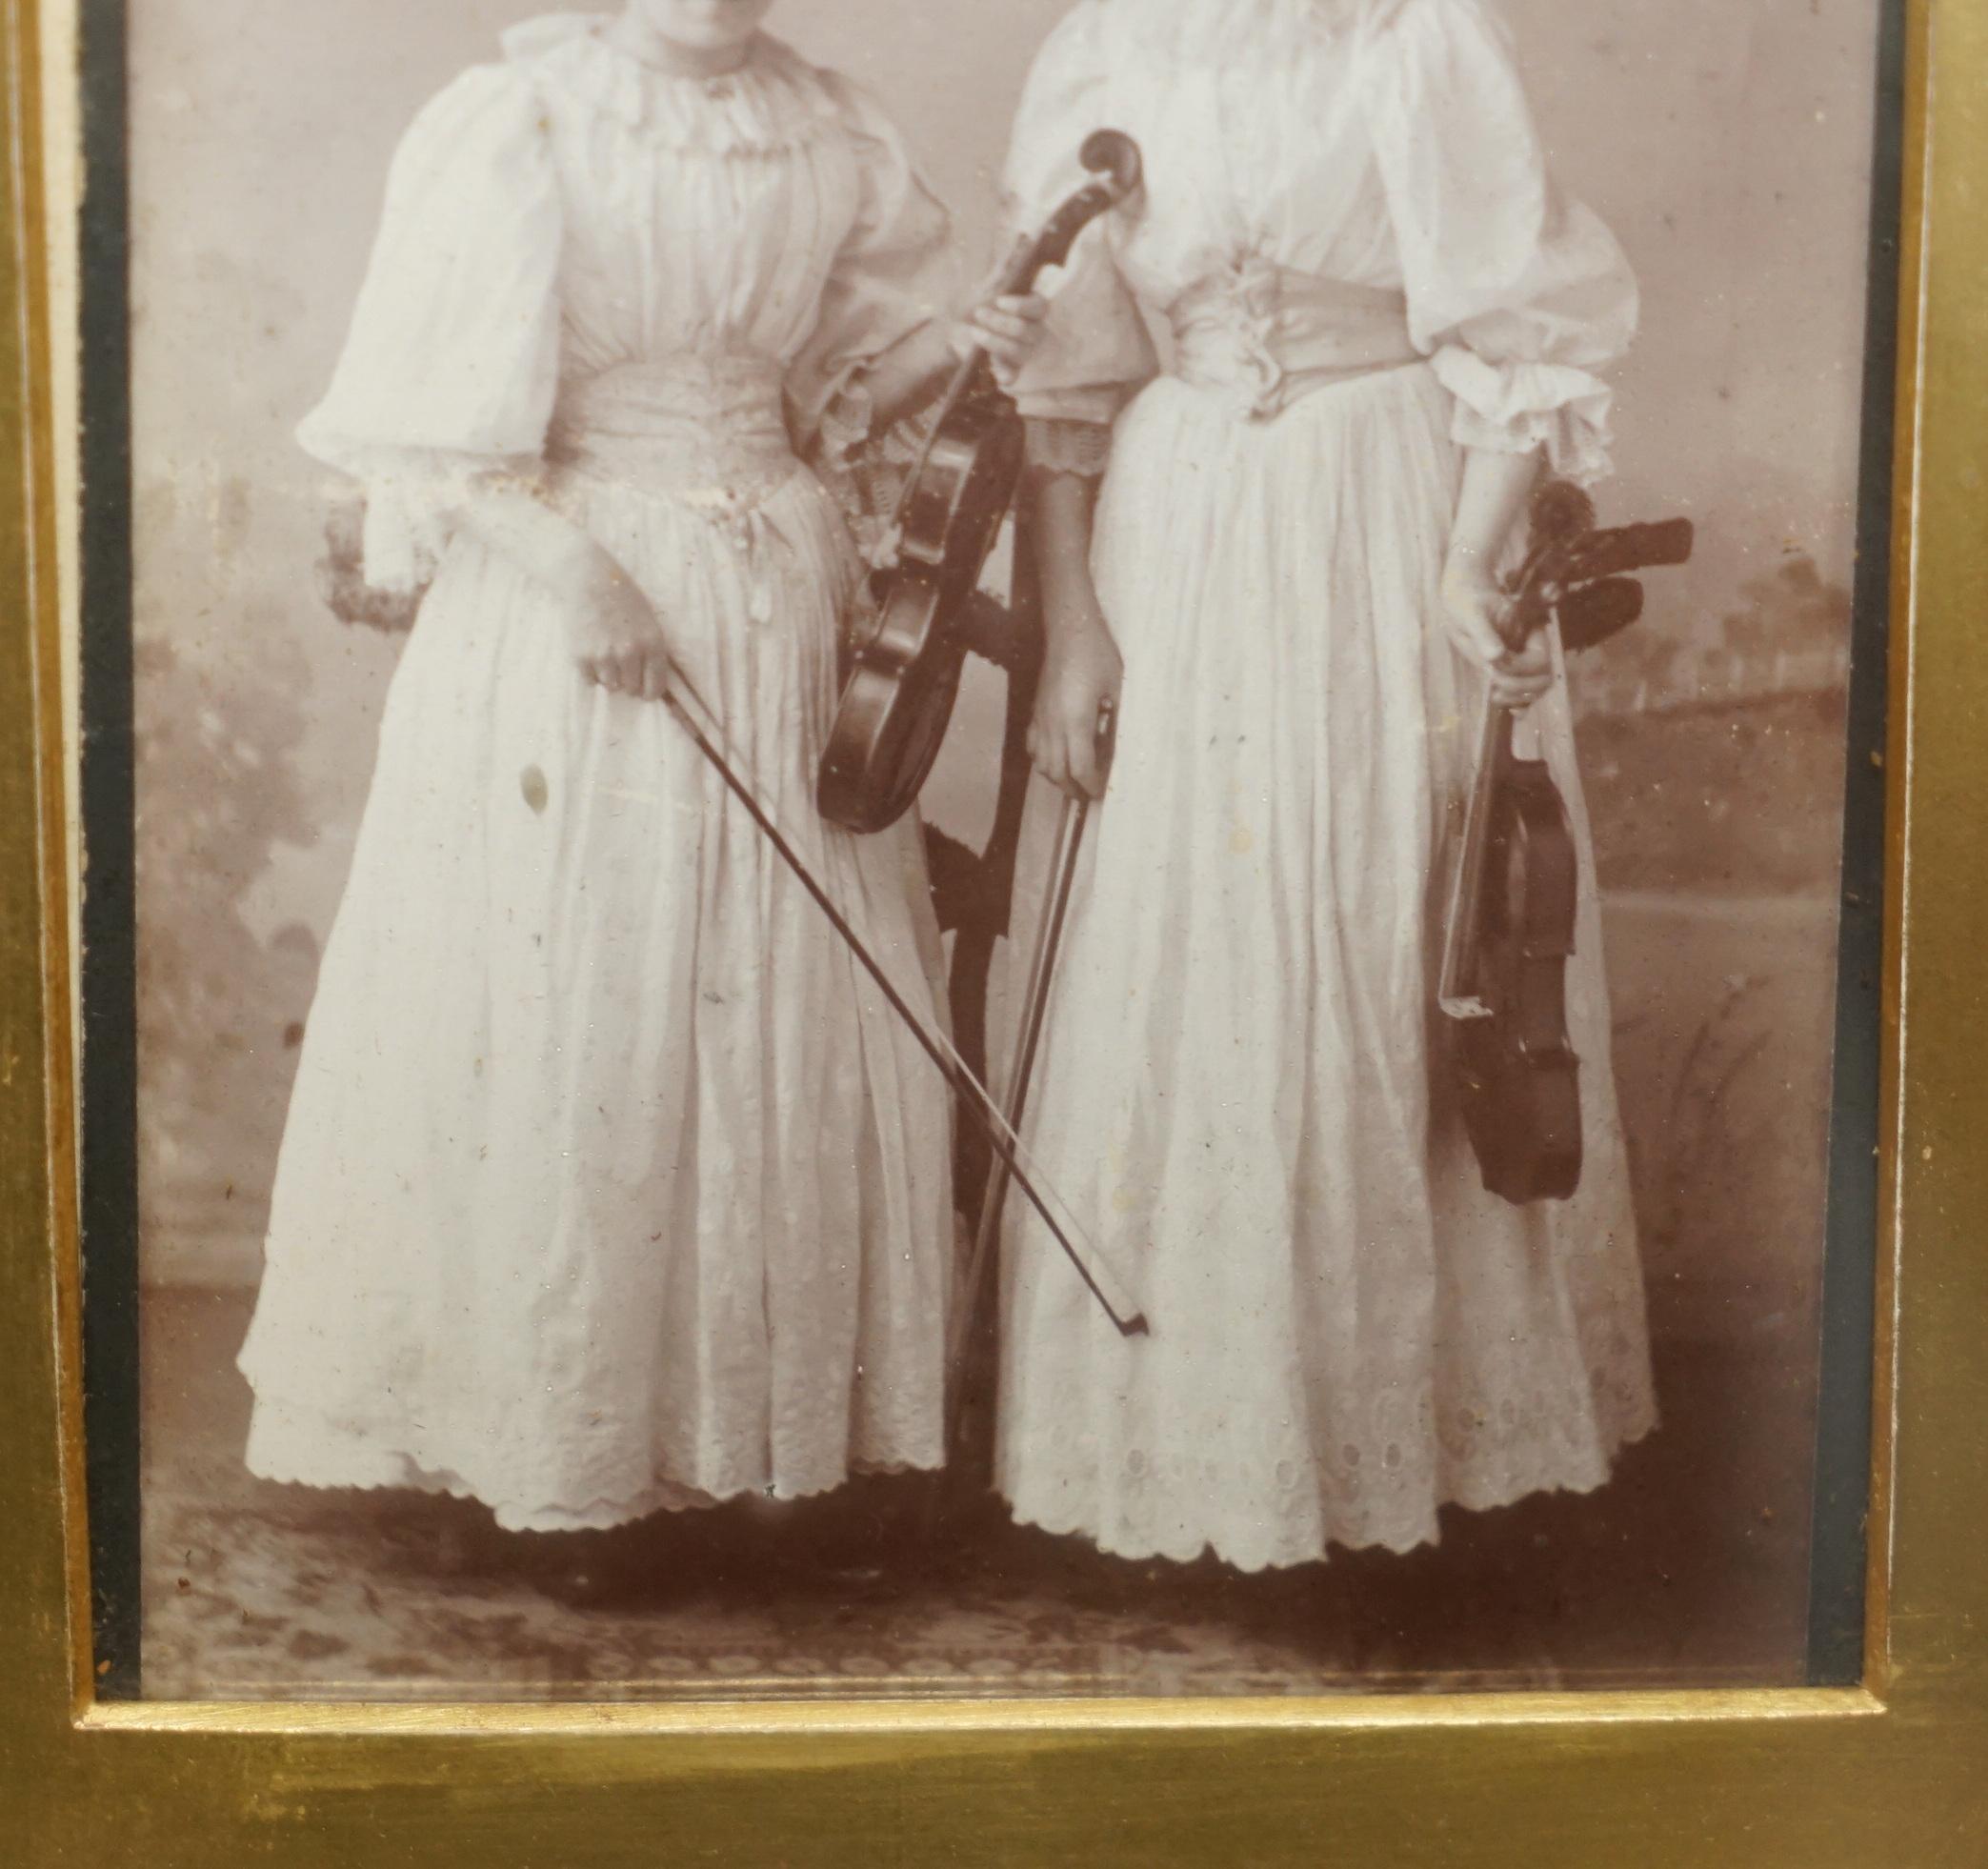 19th Century ANTIQUE ViCTORIAN VIOLINISTS PHOTO & PERIOD FRAME CASED INSIDE DISPLAY CASE For Sale